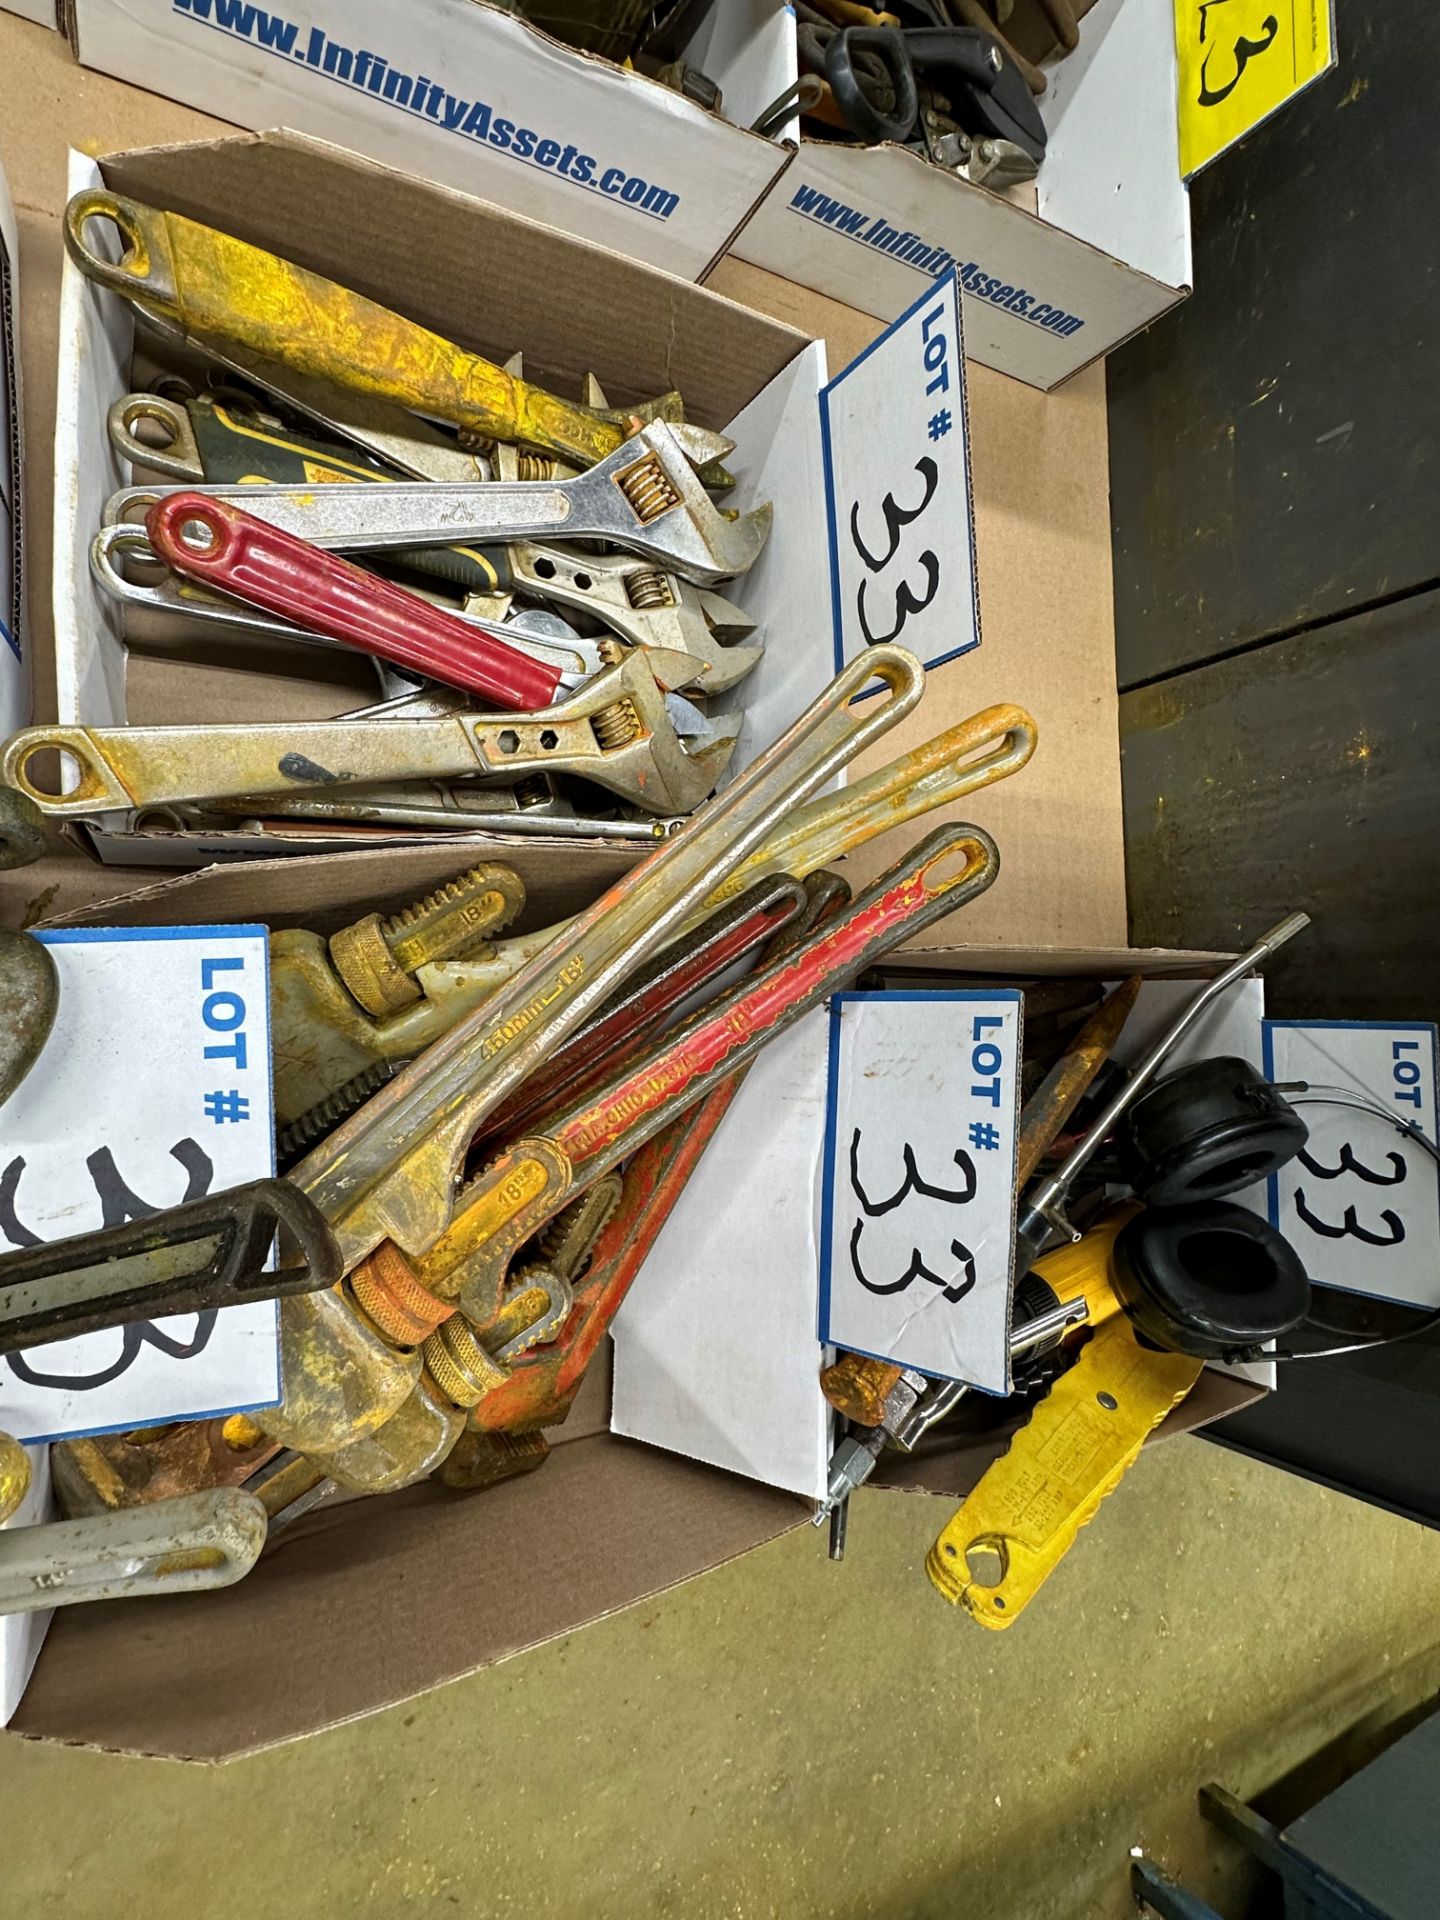 LOT OF (6) BOXES OF PIPE WRENCHES, ADJUSTABLE WRENCHES, MASTERCRAFT WRATCH WRENCHES PUNCHES, ETC. - Image 3 of 4